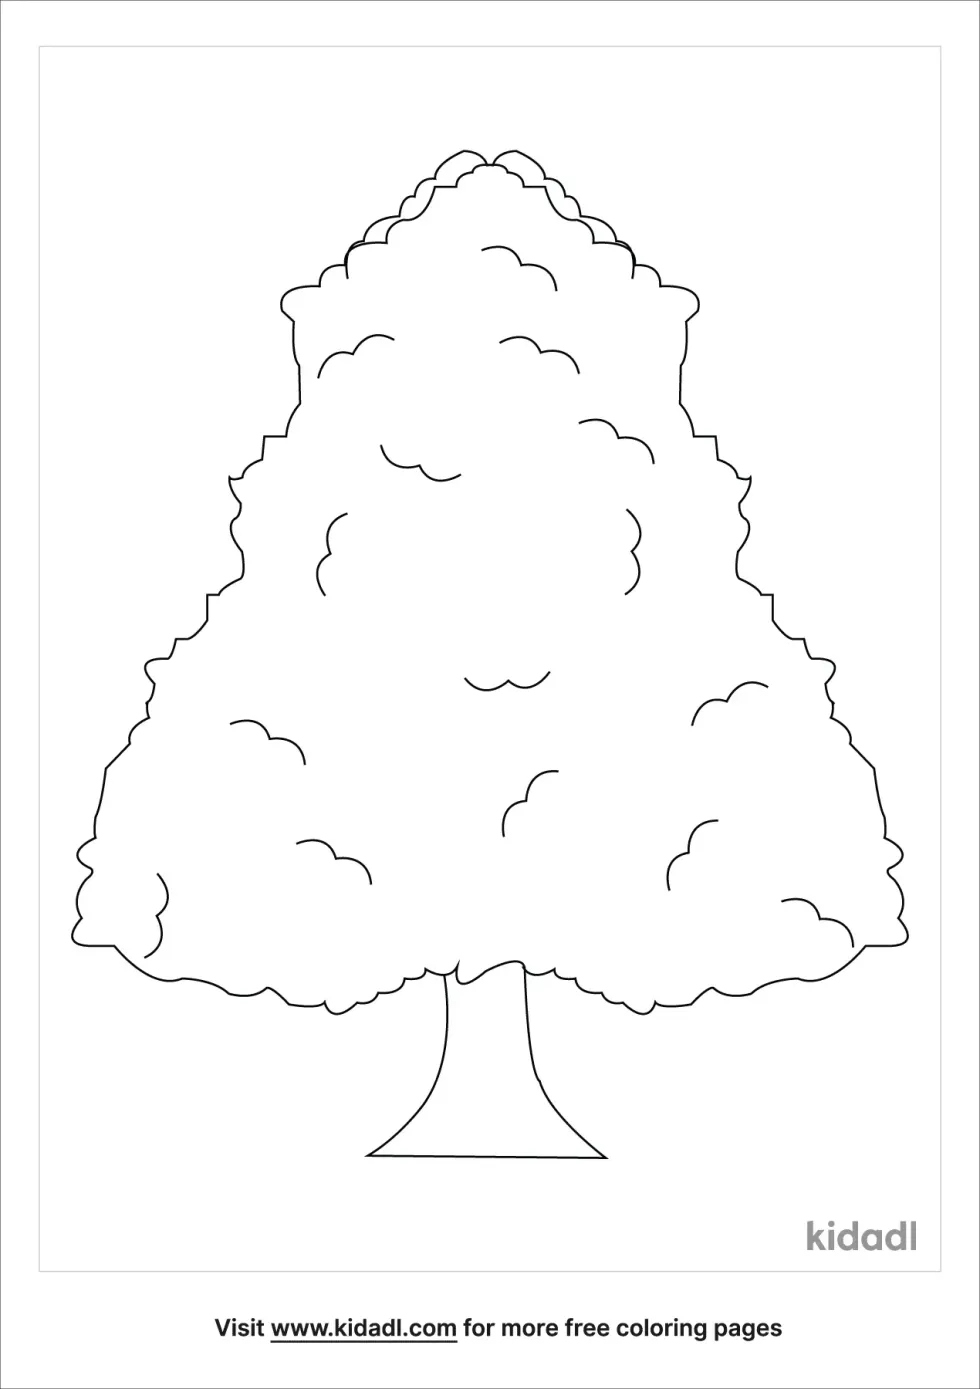 Linden Tree Coloring Page